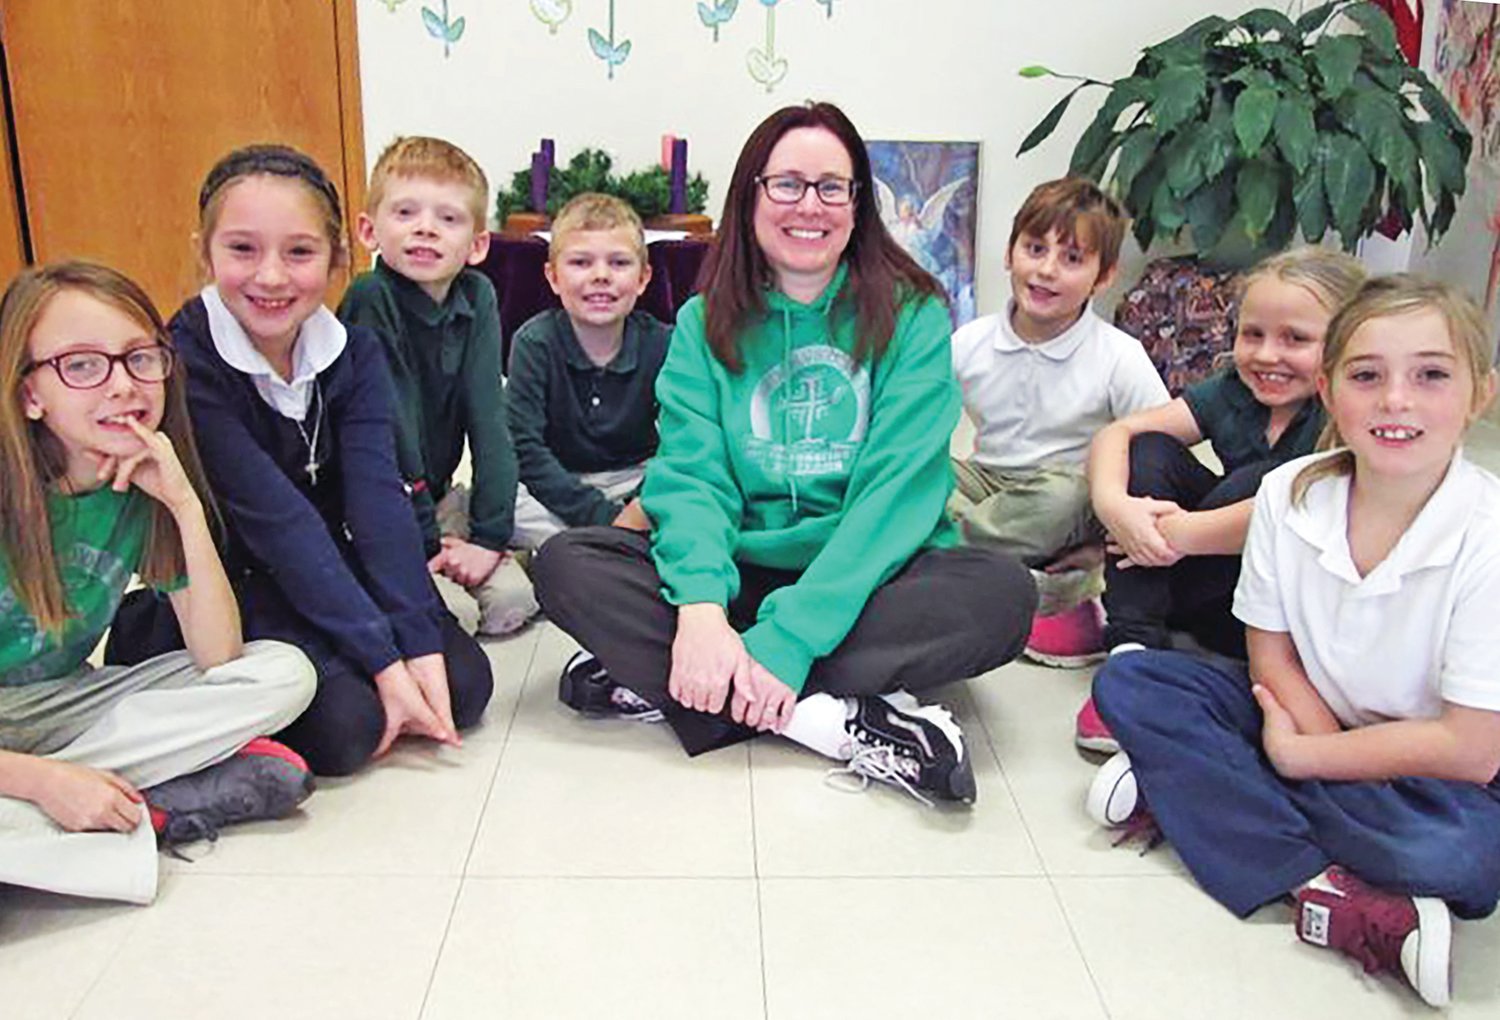 Melinda Osentowski, the new principal of Holy Cross School in Cuba, gathers with a few of the students.